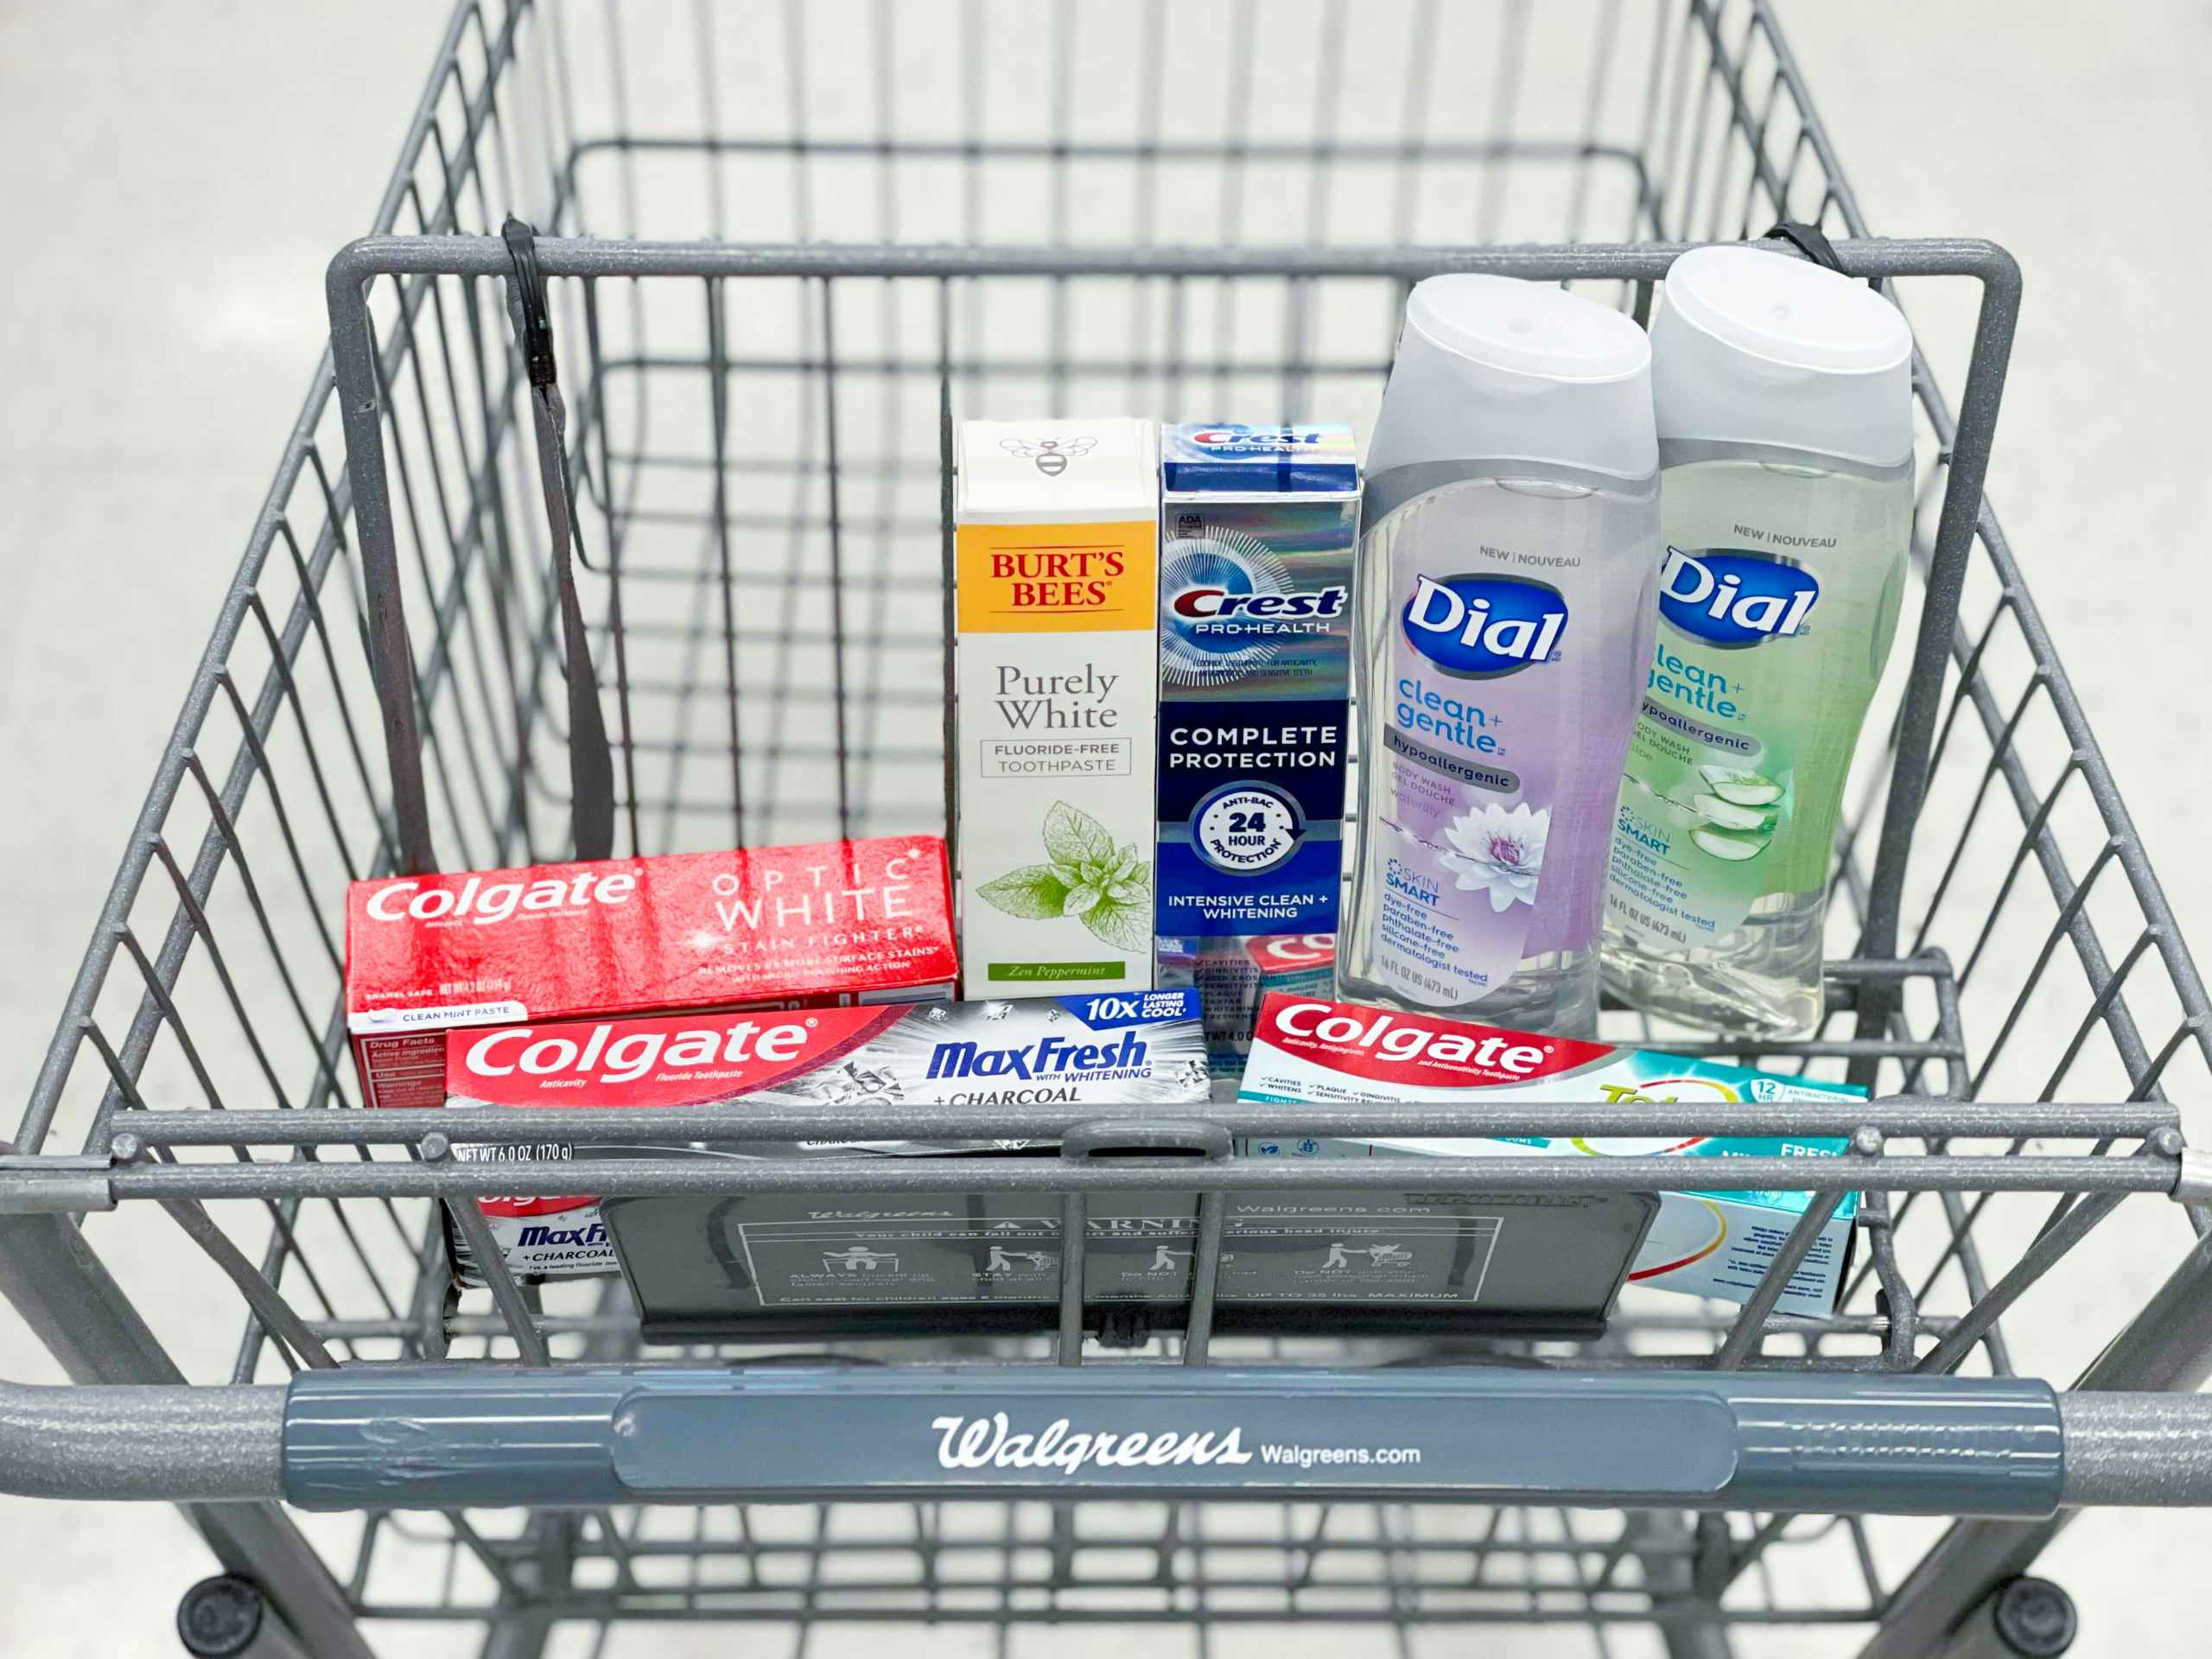 walgreens-shopping-haul-burts-bees-colgate-crest-toothpaste-dial-body-wash-may-2021-em